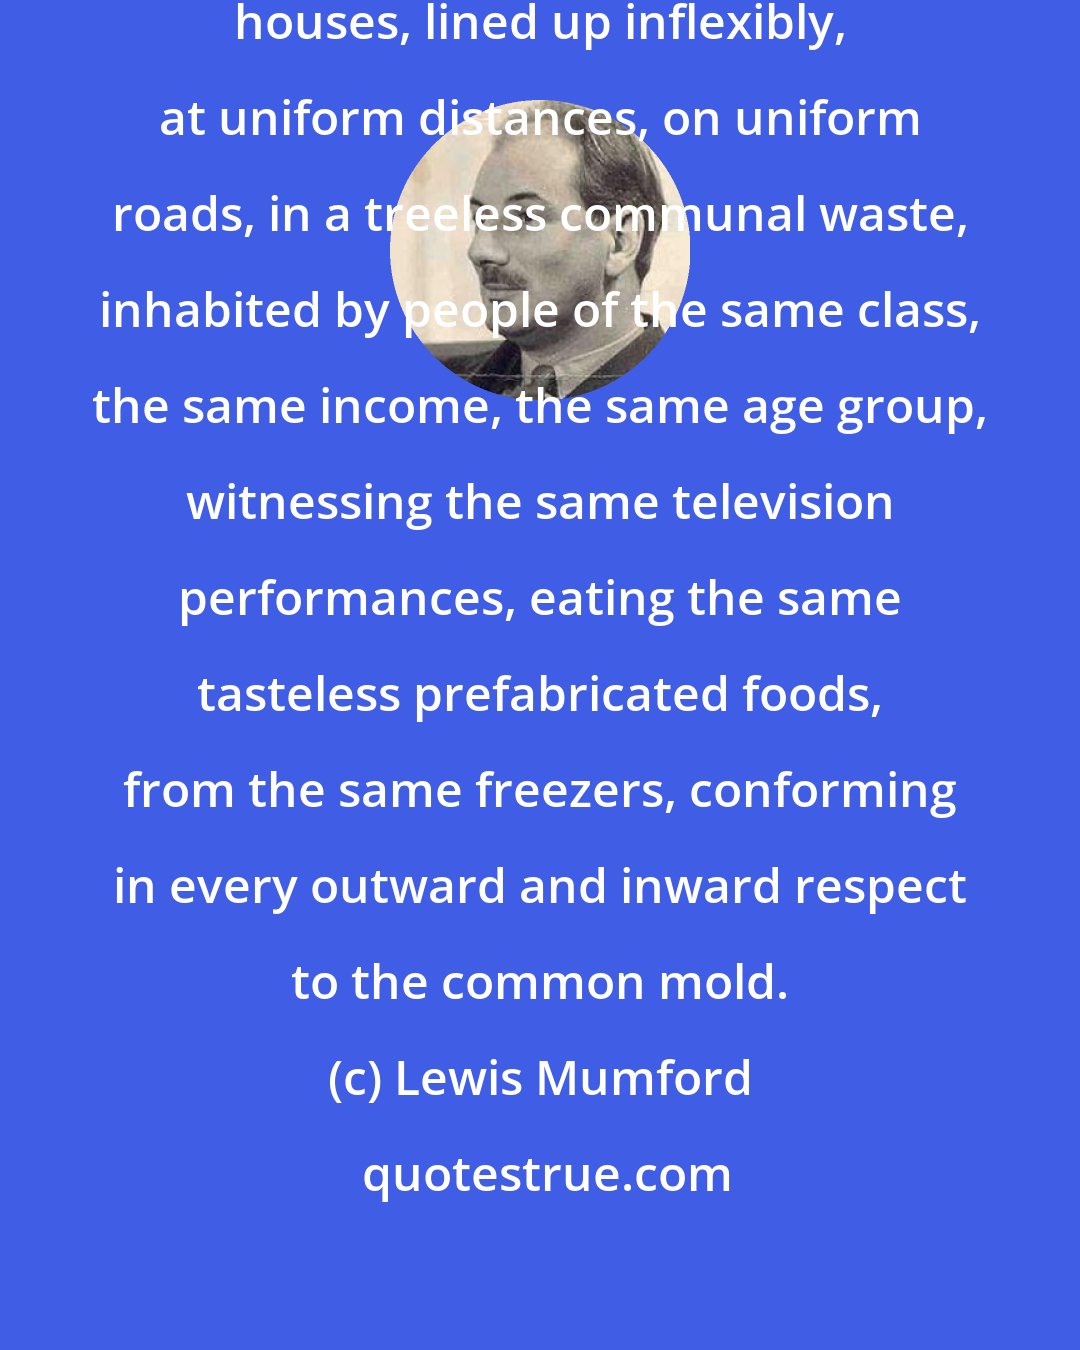 Lewis Mumford: A multitude of uniform, unidentifiable houses, lined up inflexibly, at uniform distances, on uniform roads, in a treeless communal waste, inhabited by people of the same class, the same income, the same age group, witnessing the same television performances, eating the same tasteless prefabricated foods, from the same freezers, conforming in every outward and inward respect to the common mold.